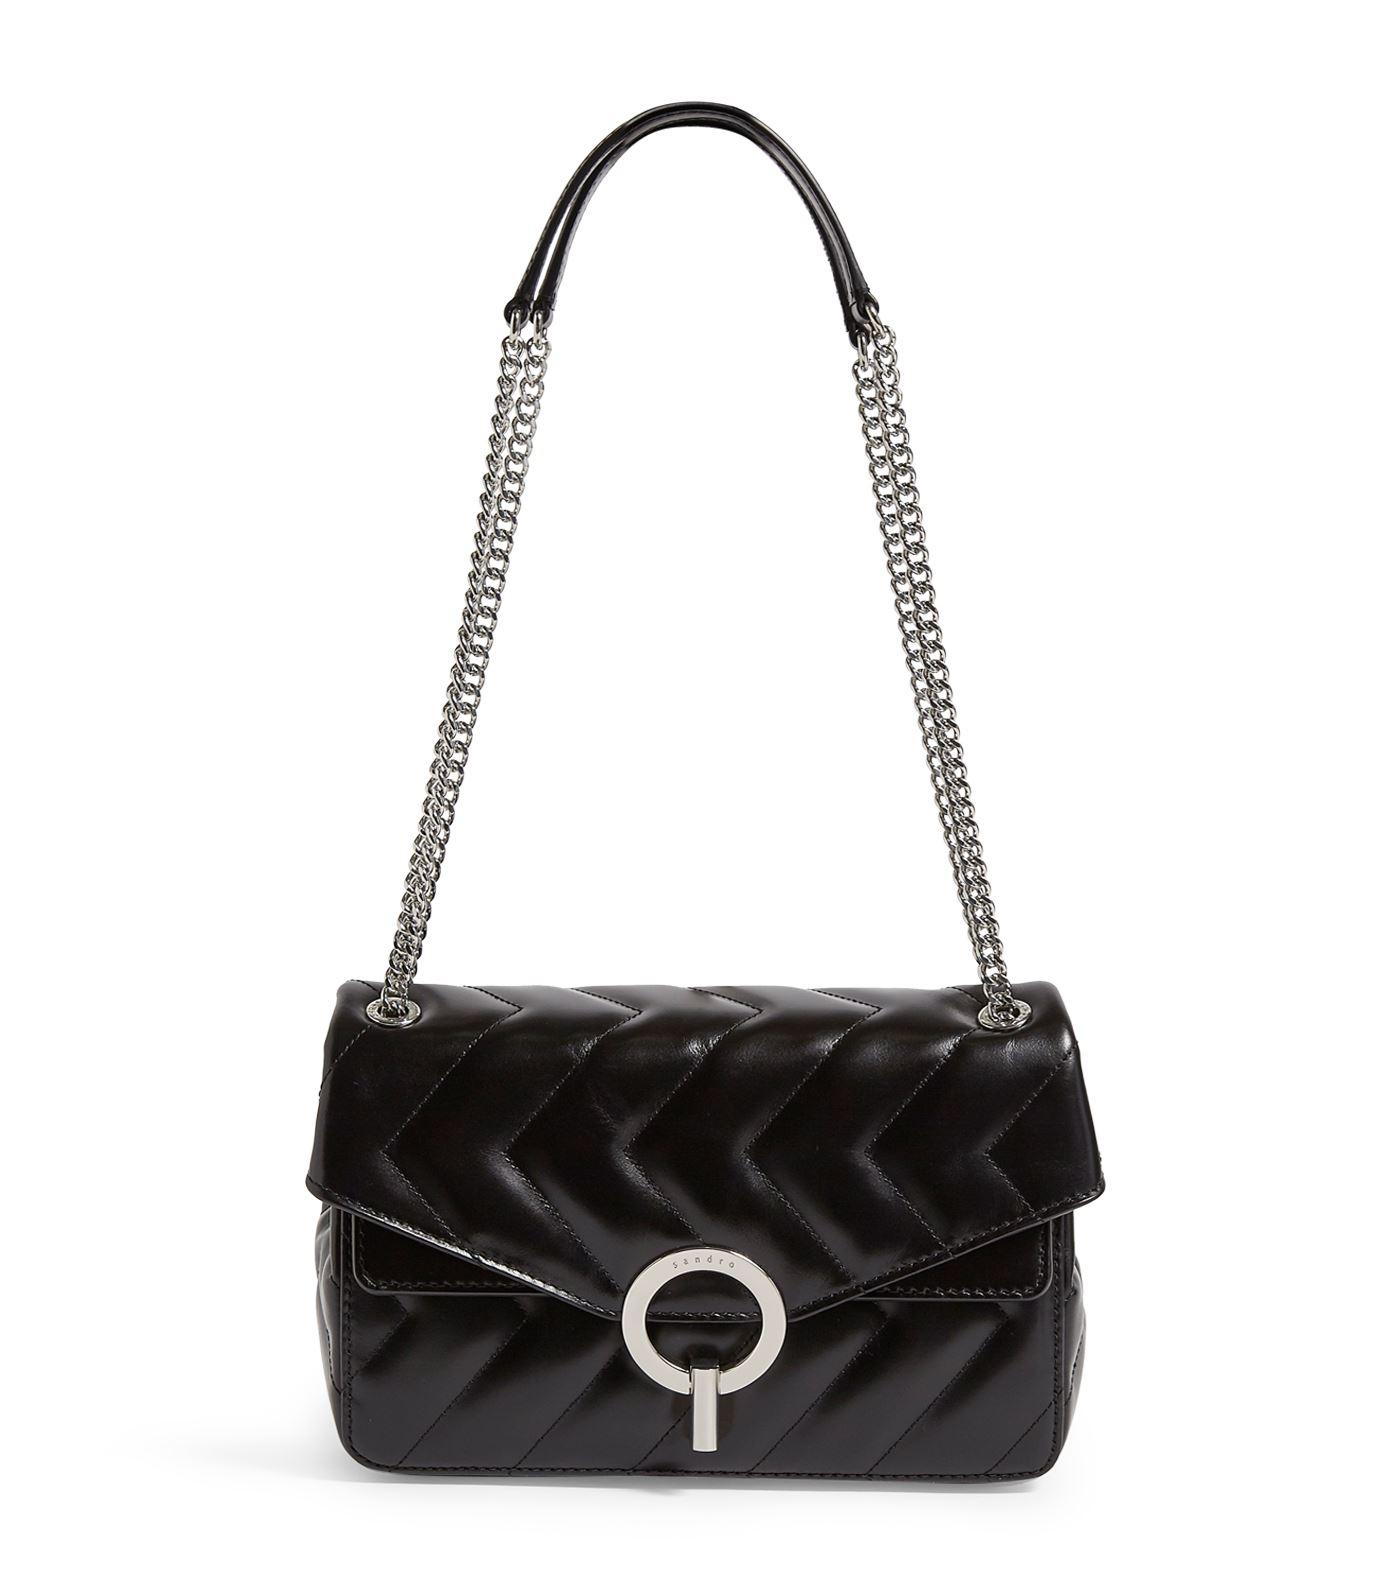 Sandro Leather Quilted Bag in Black - Lyst